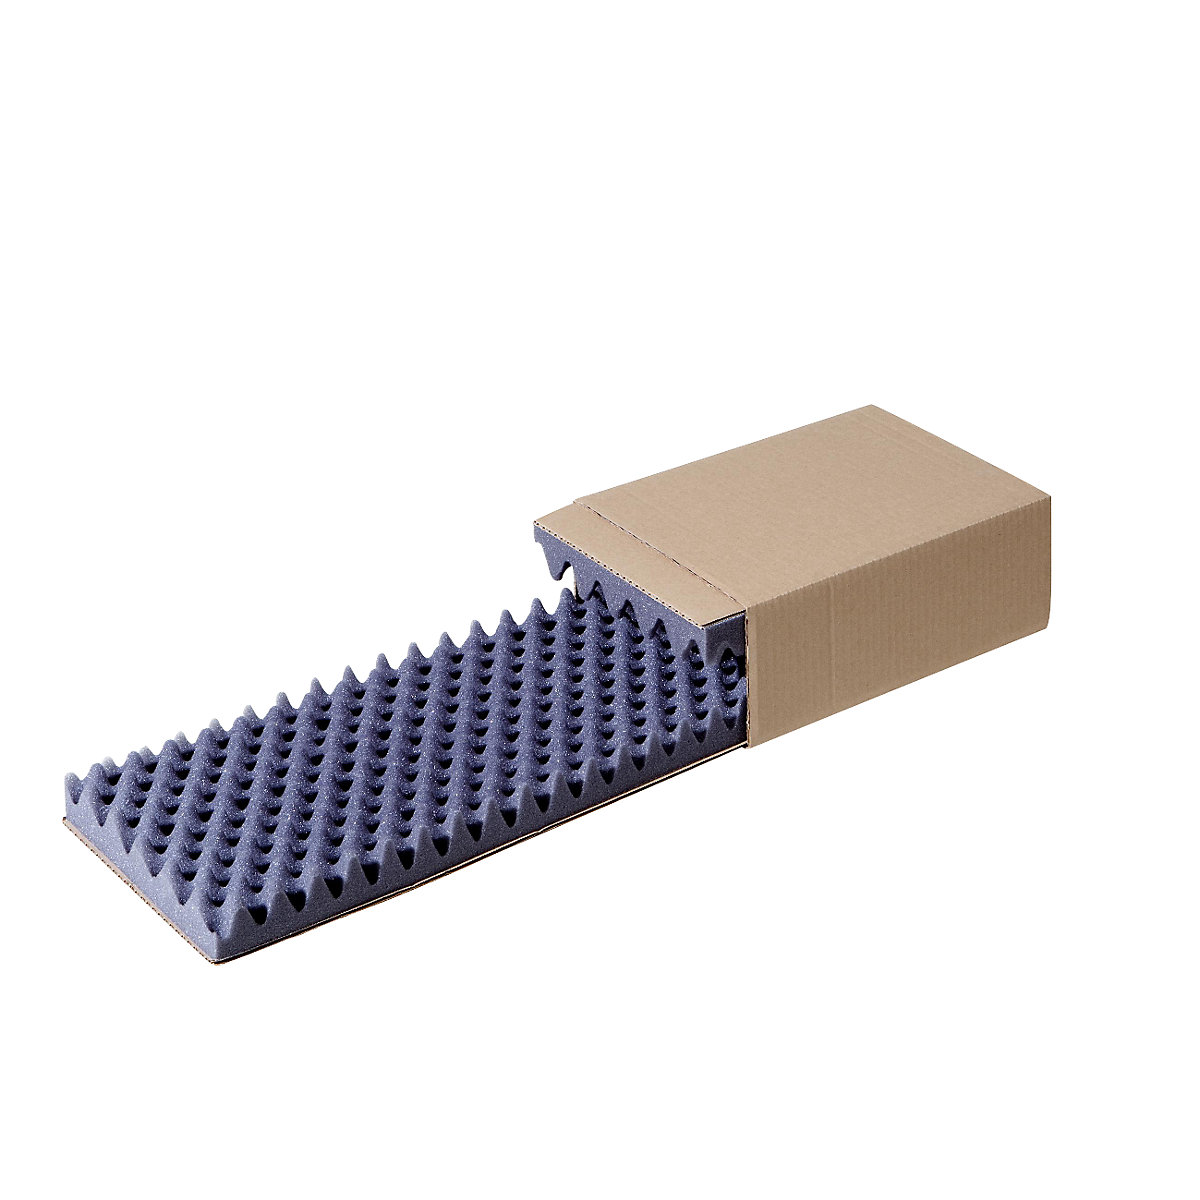 Slide boxes, internal part FEFCO 0907, external part FEFCO 0503, padded, internal dimensions 300 x 200 x 100 mm, pack of 100